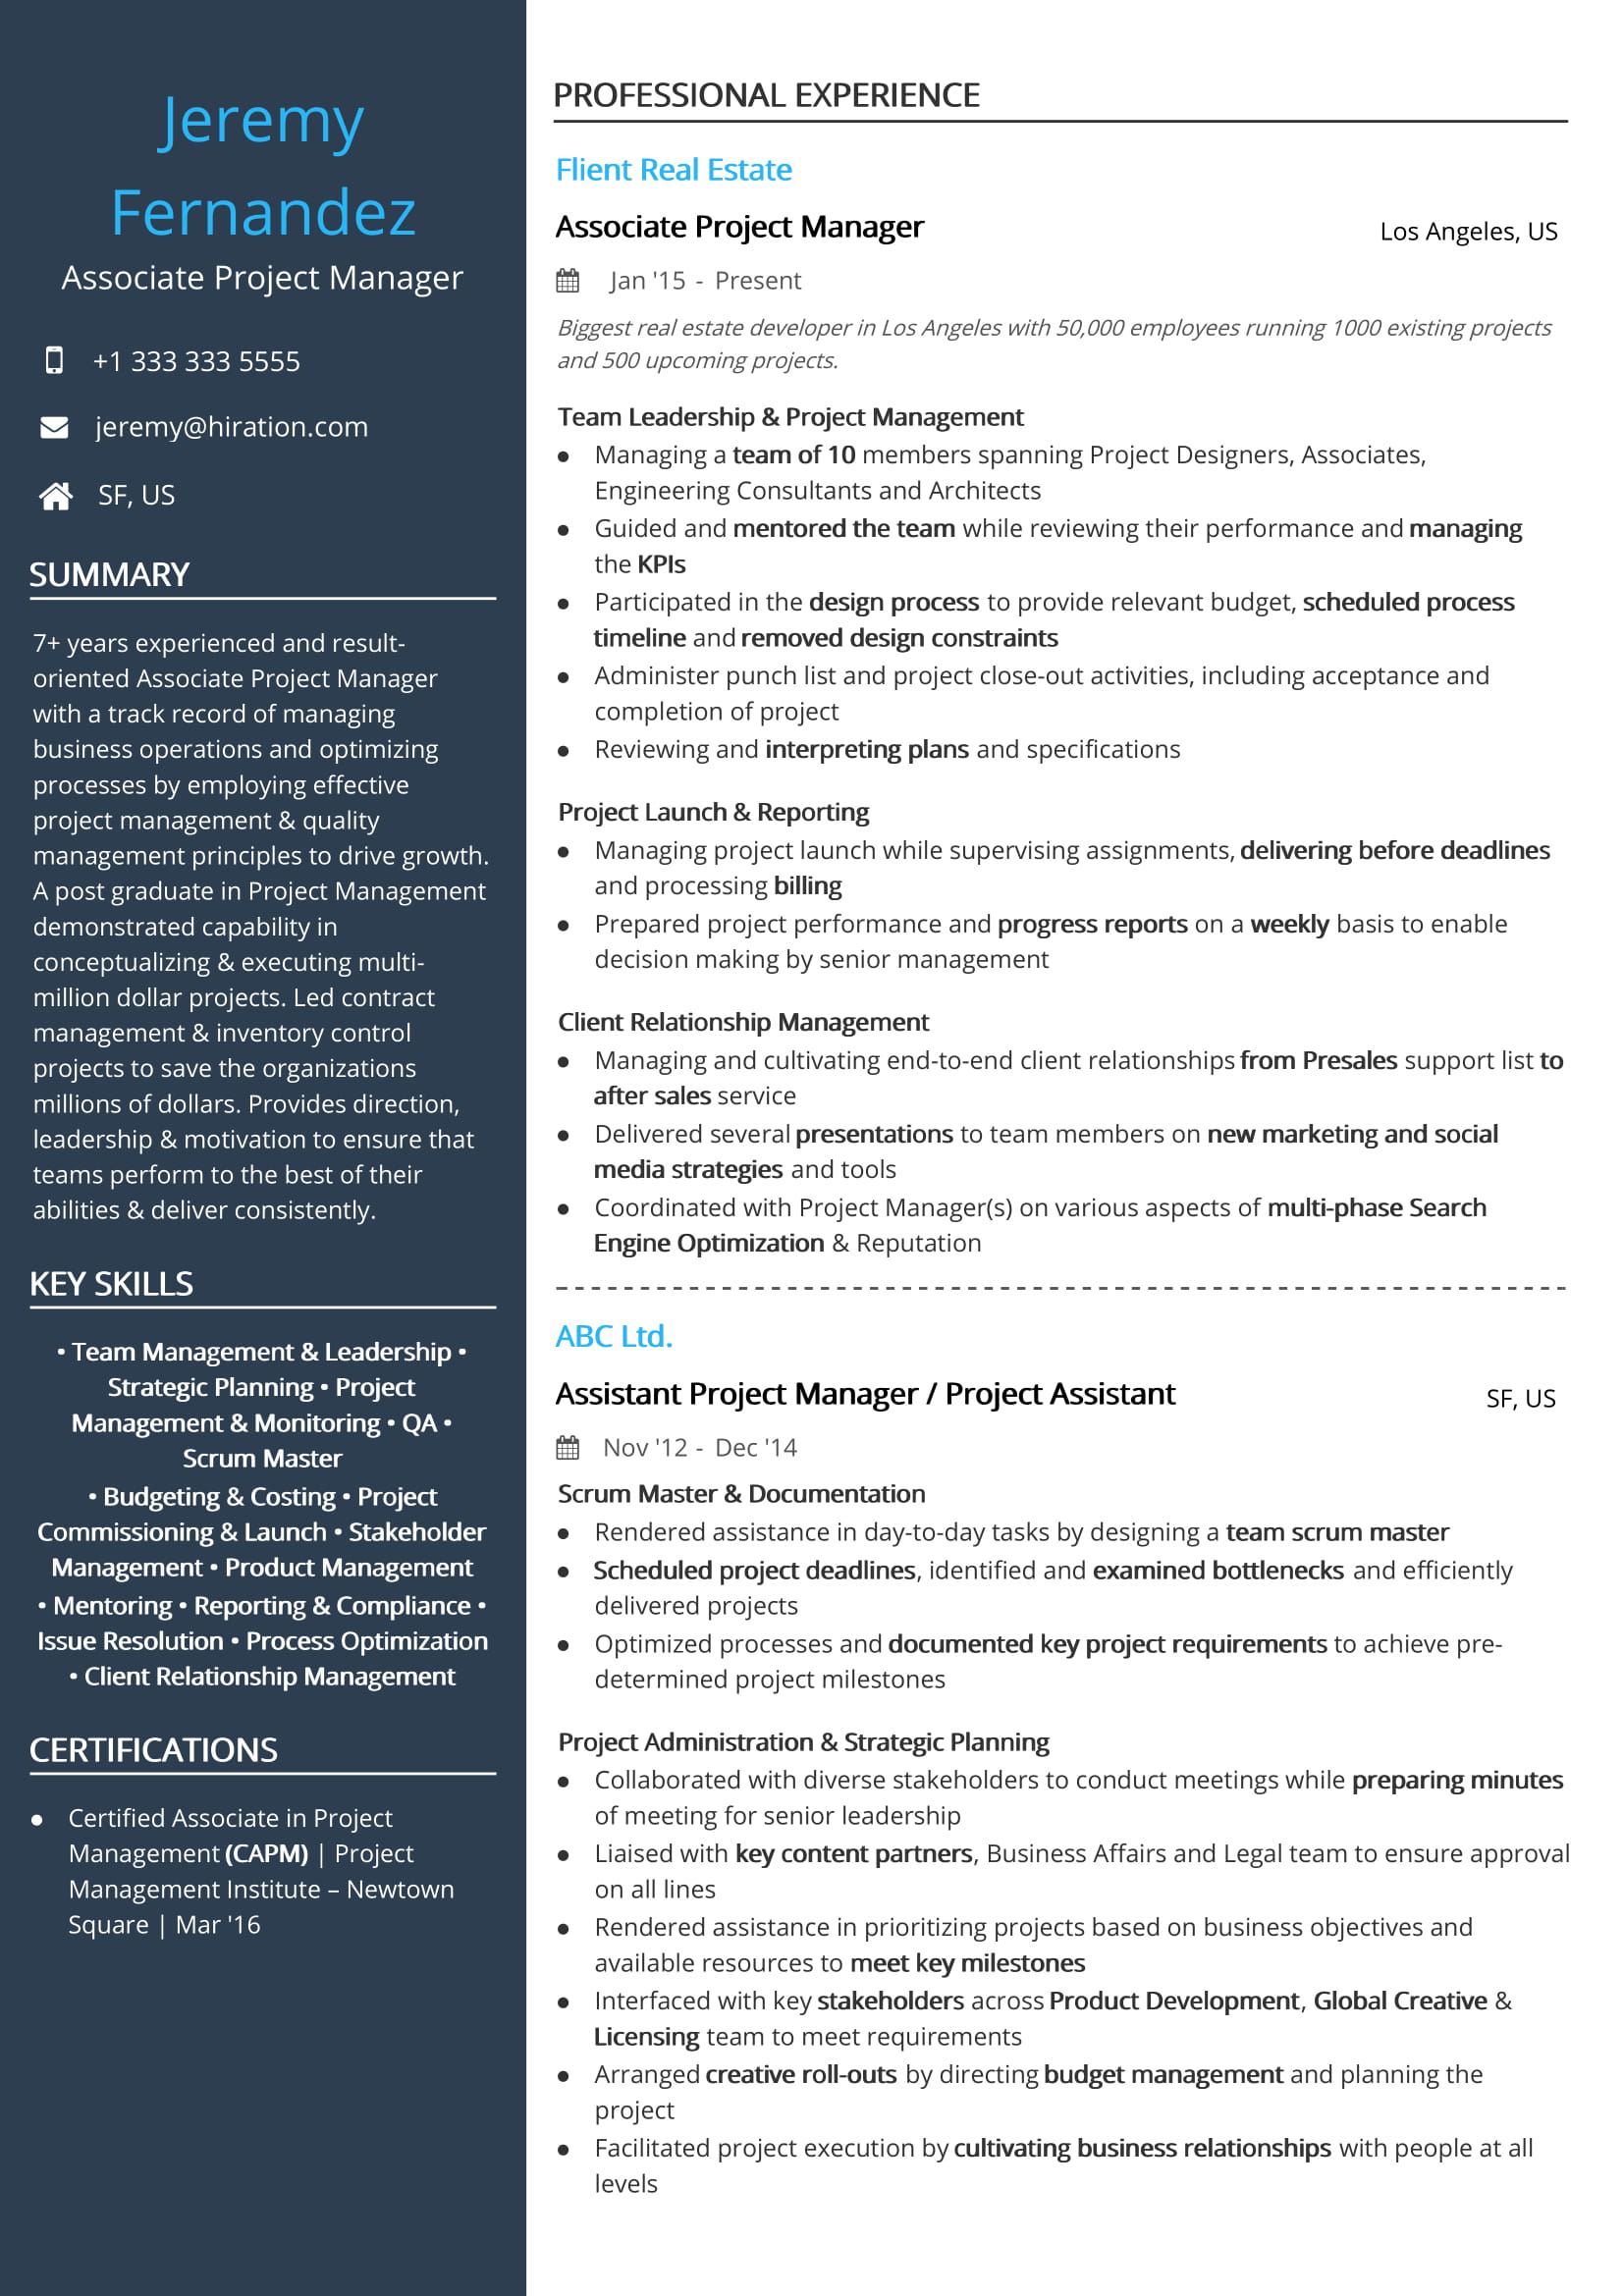 Project Management Resume Examples &  Resume Samples [2020]